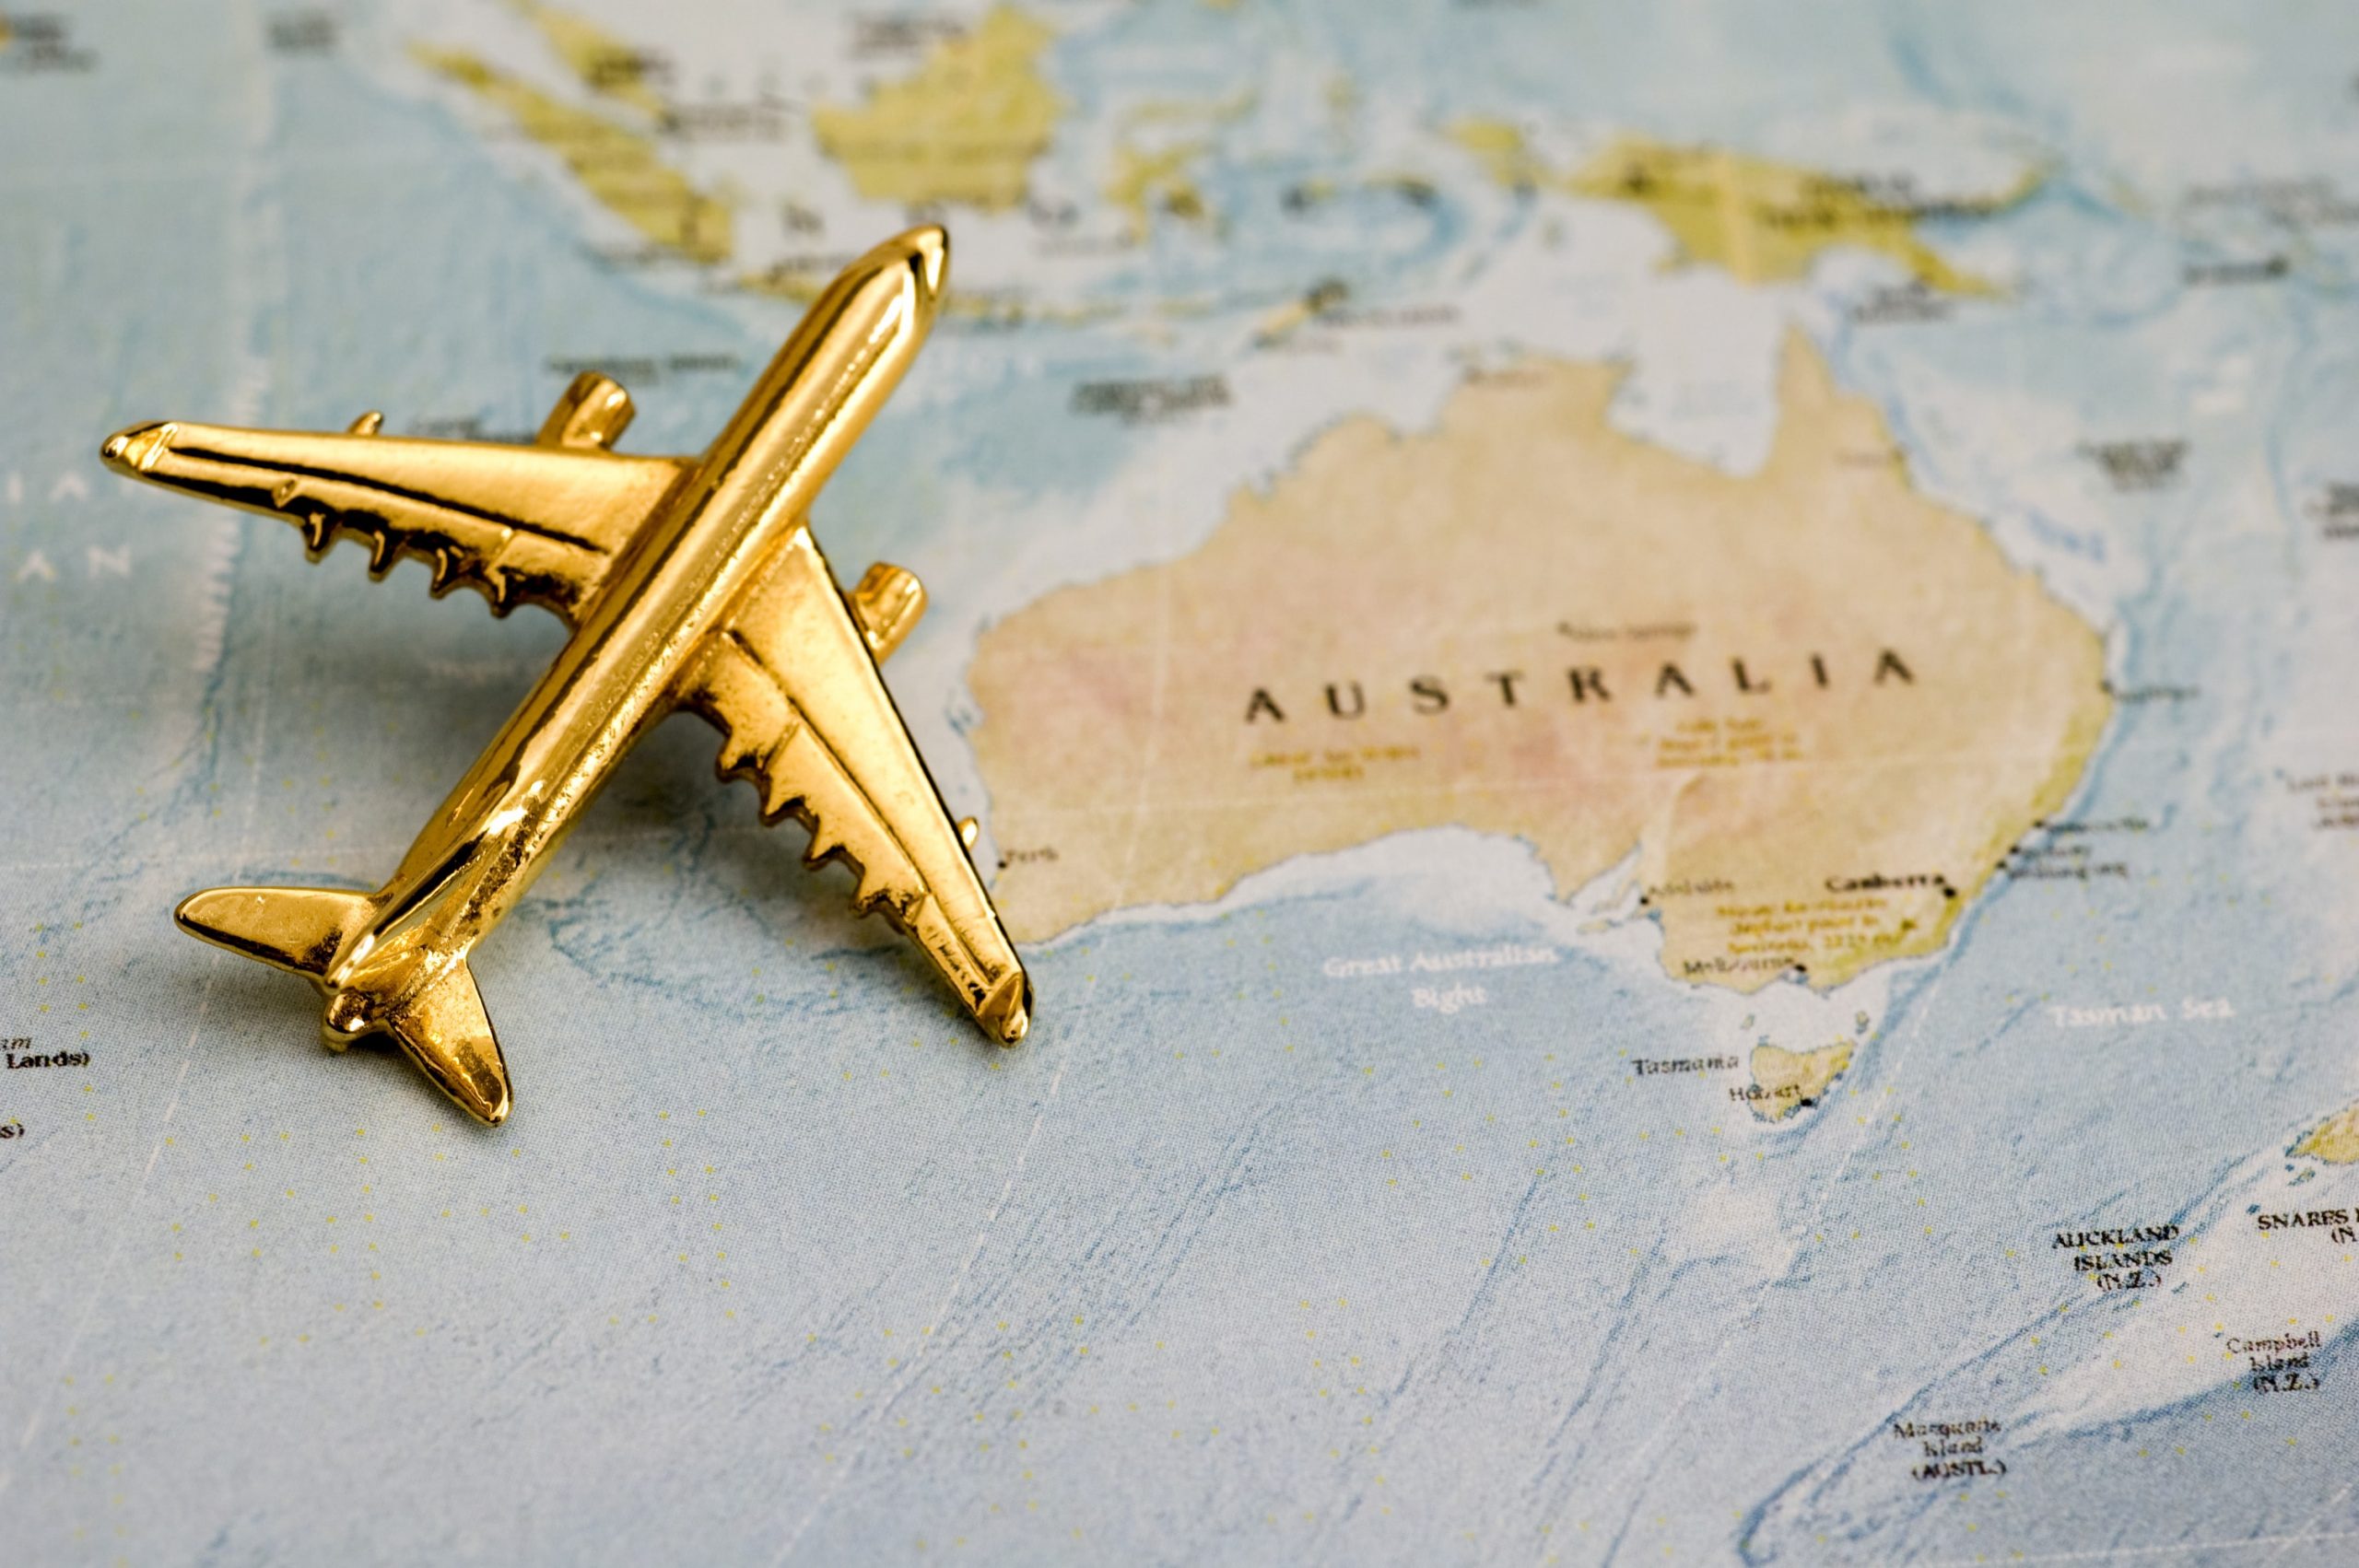 What to expect from Australian Immigration in 2022? – Recap of recent changes